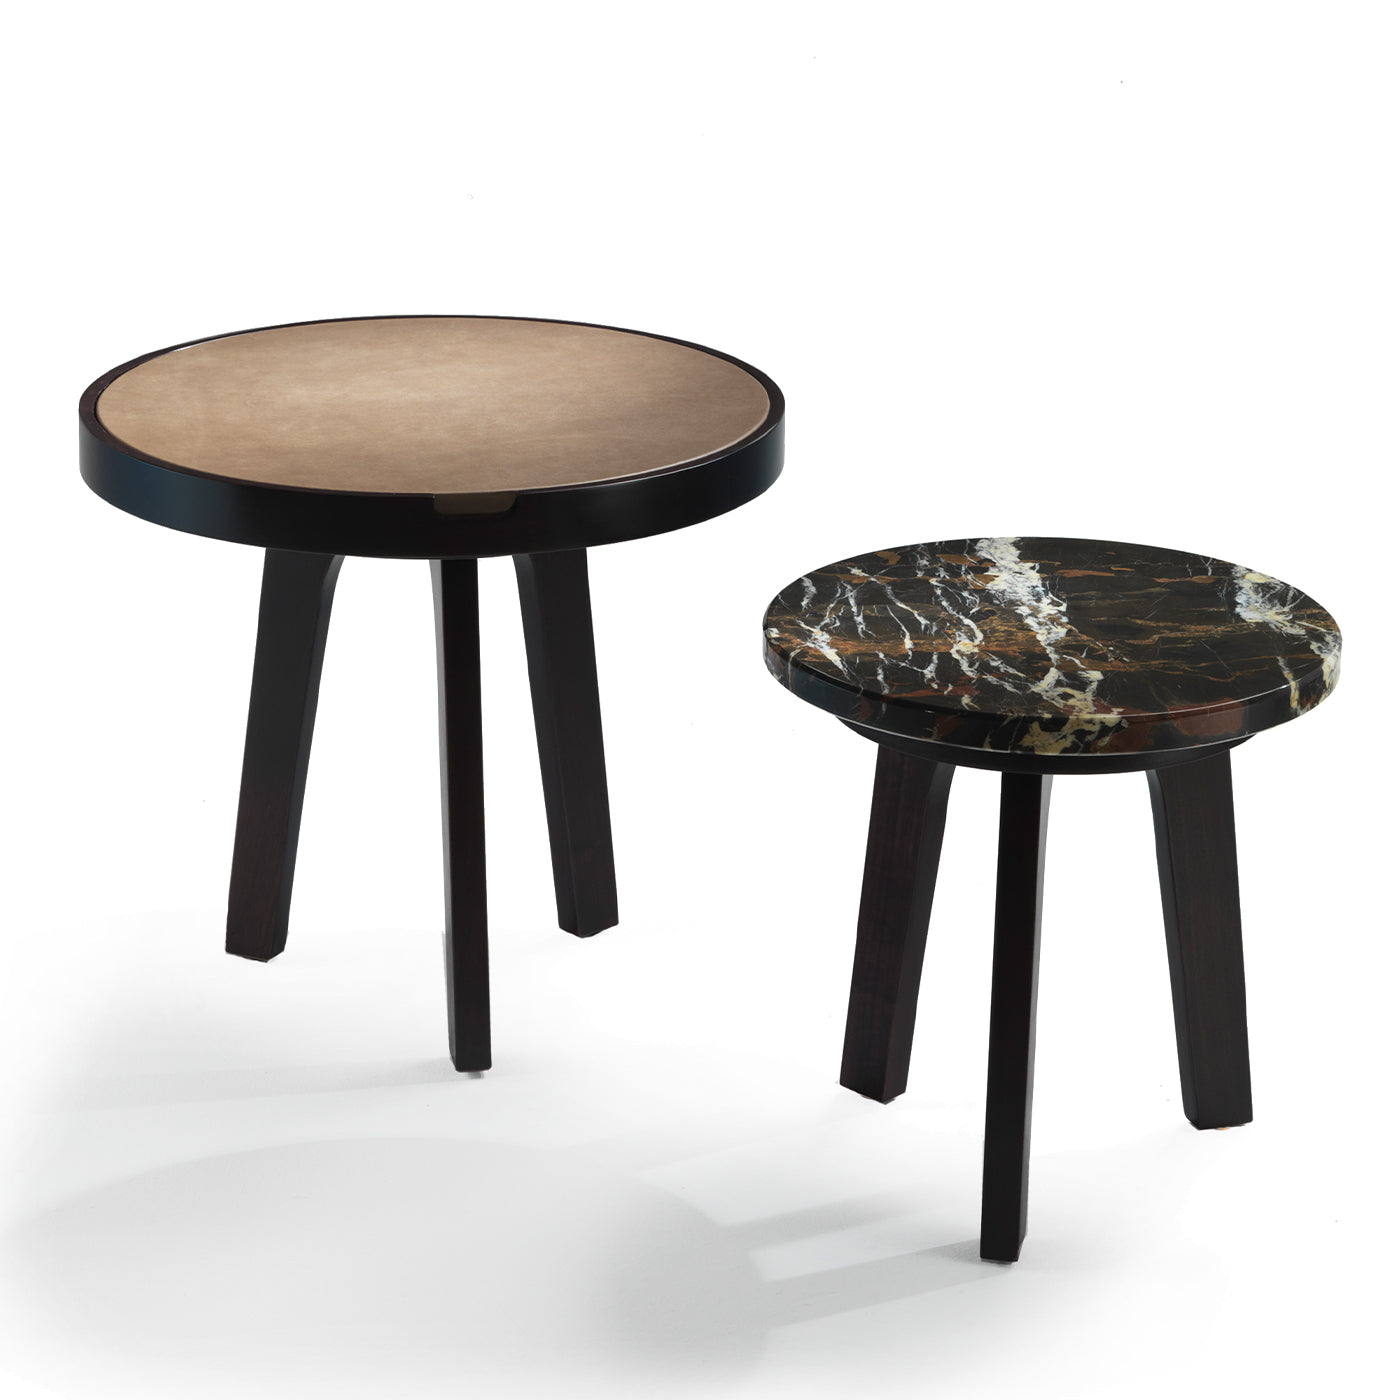 Aurous Side Table by Archer Humphryes Architects - Alternative view 1